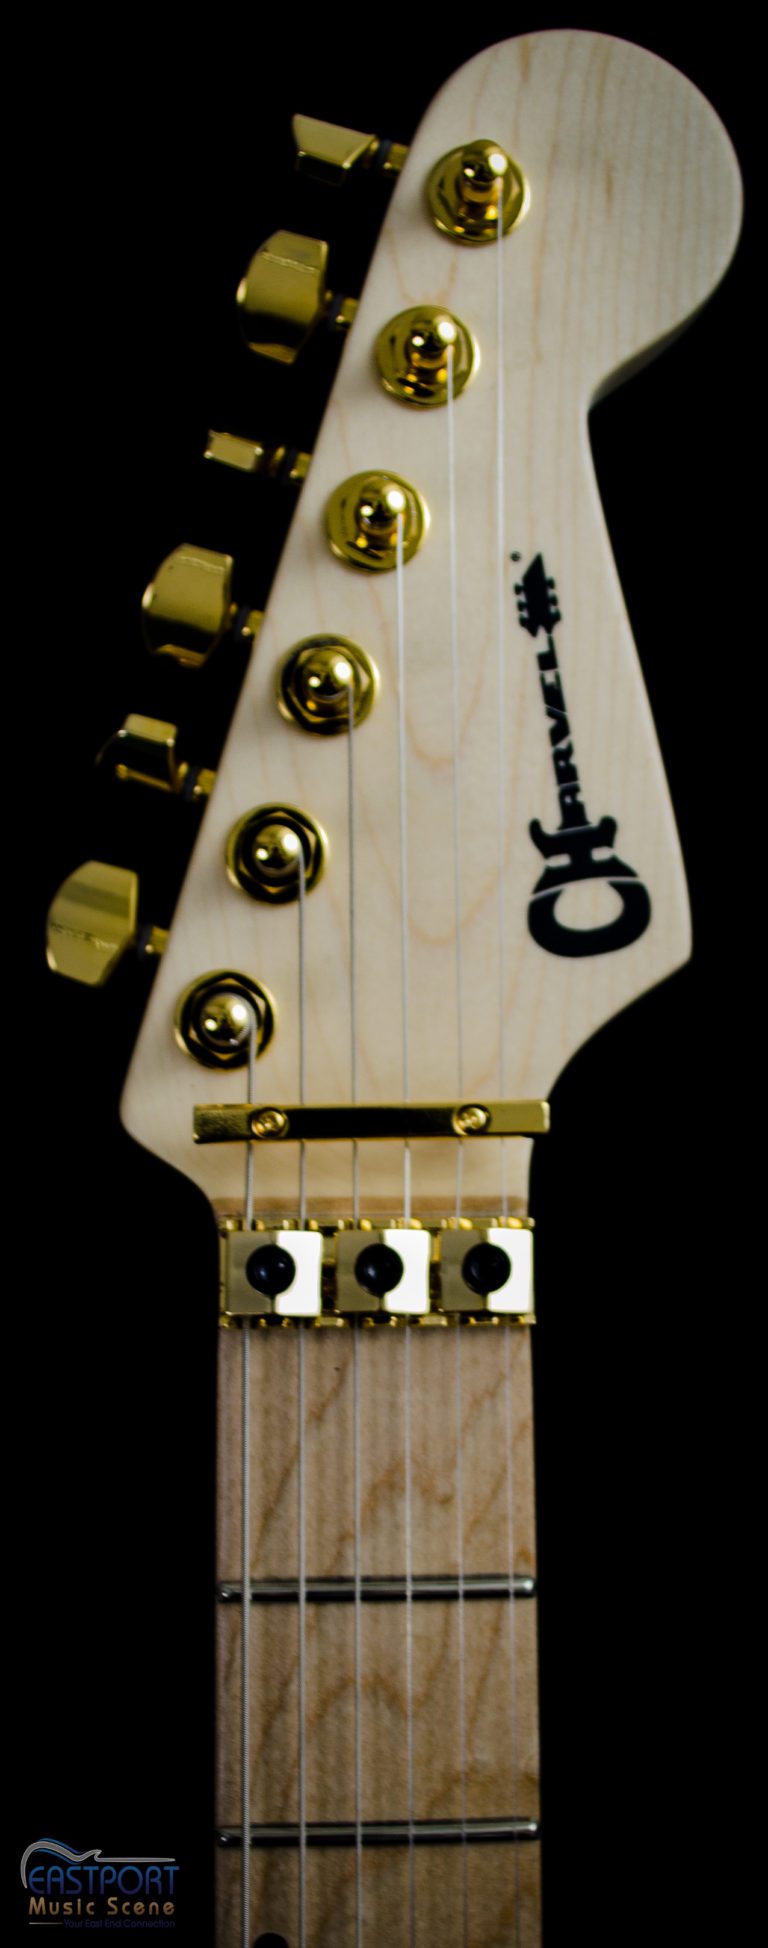 A close up of the neck and strings on an electric guitar.